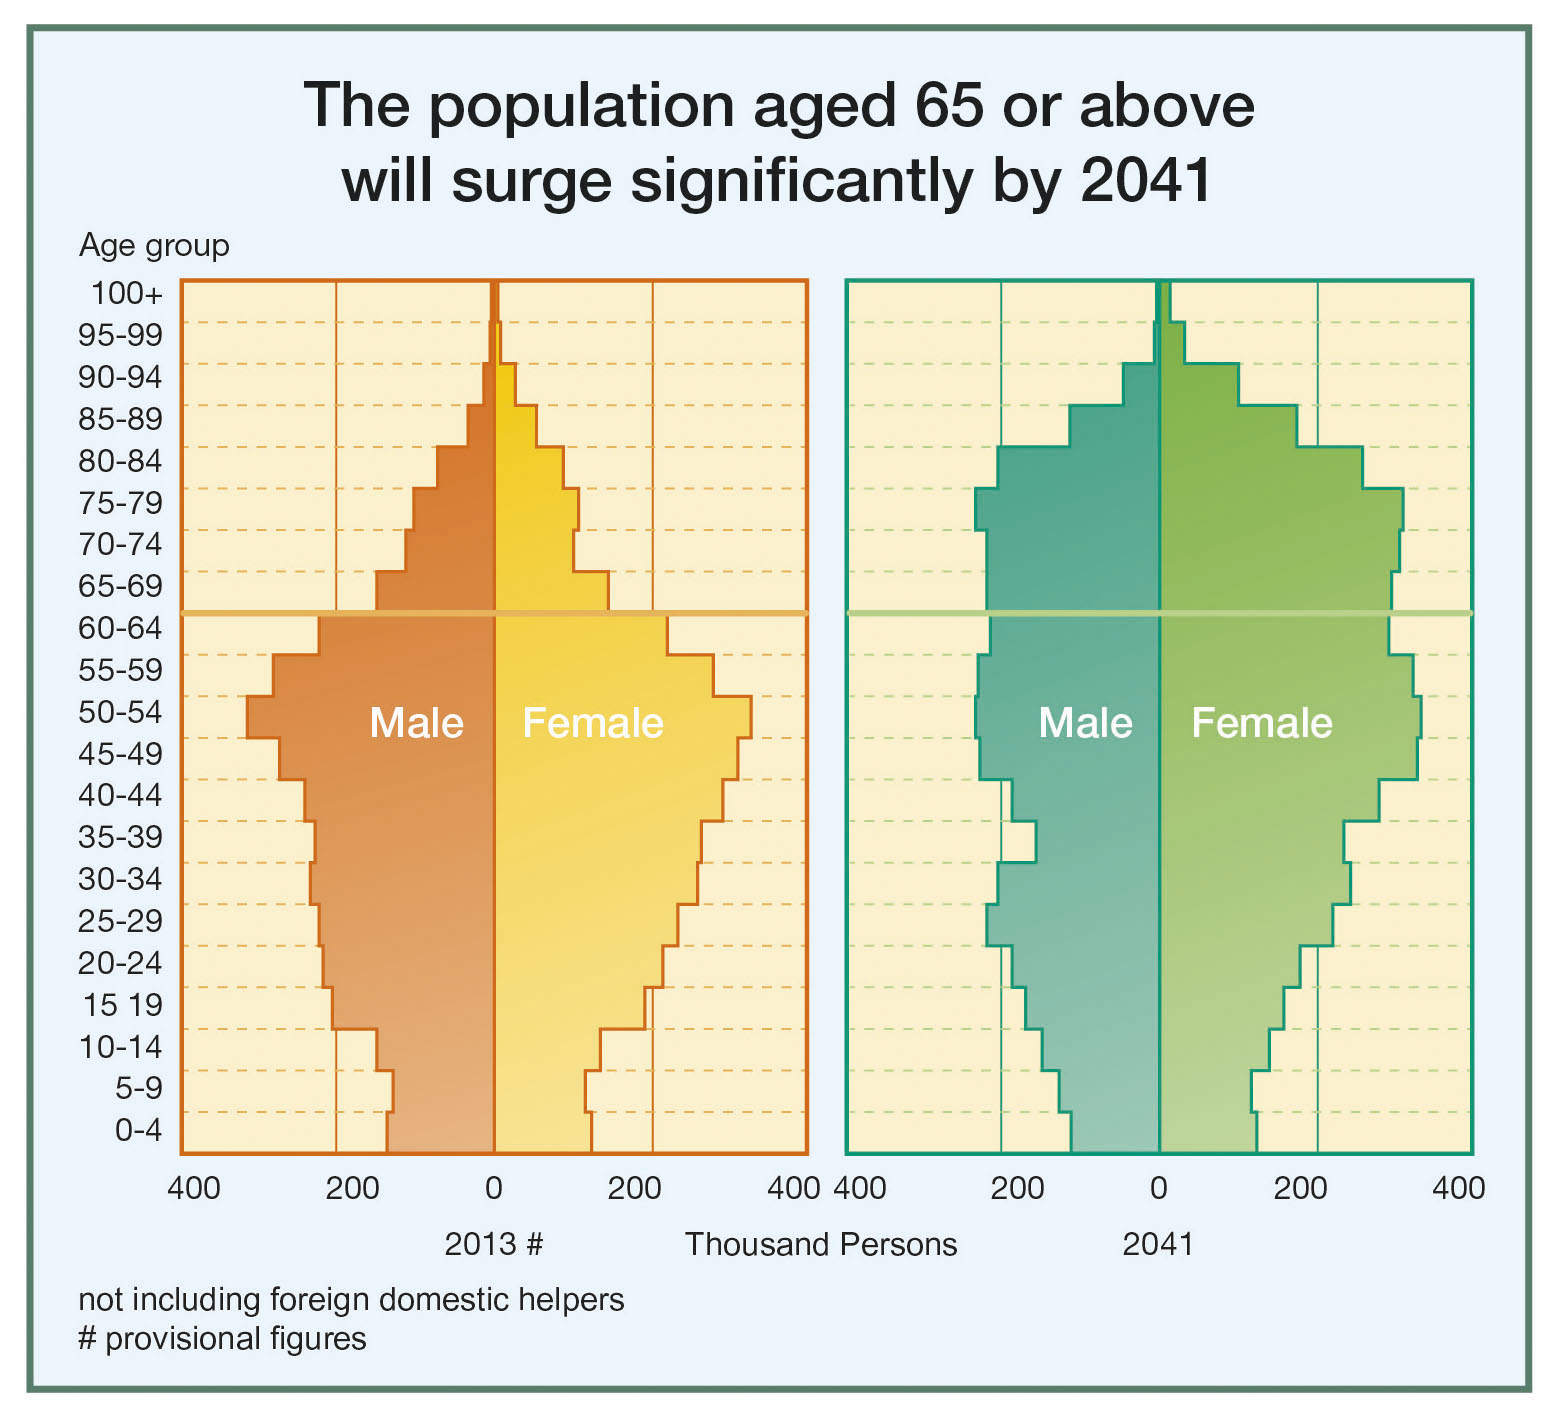 Aging population in hk - mfacourses826.web.fc2.com